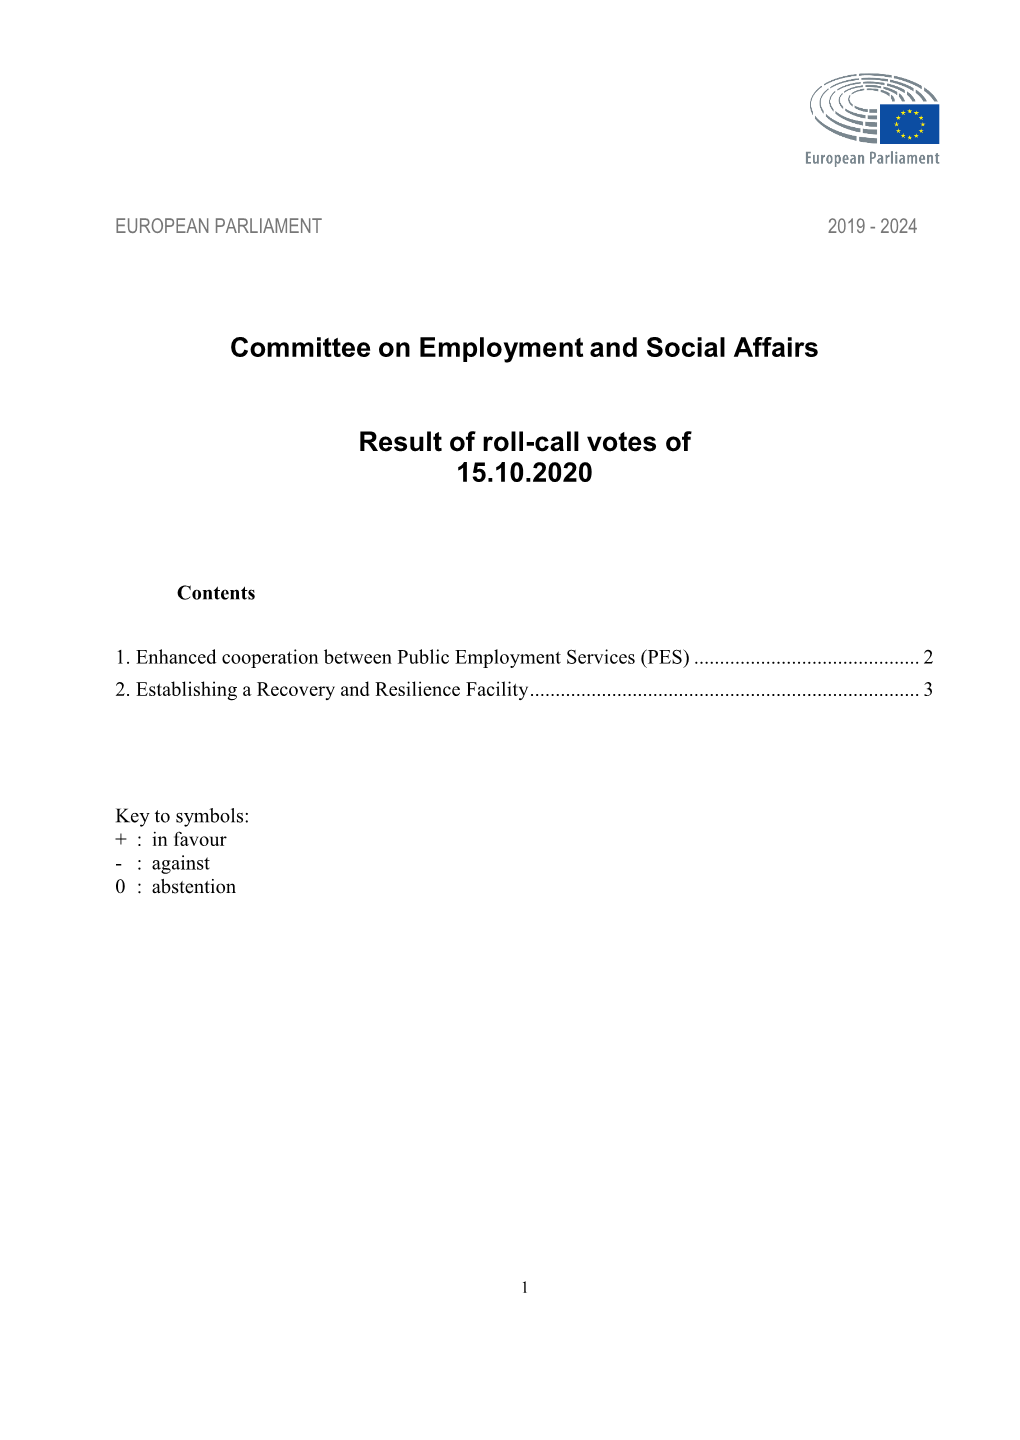 Committee on Employment and Social Affairs Result of Roll-Call Votes Of